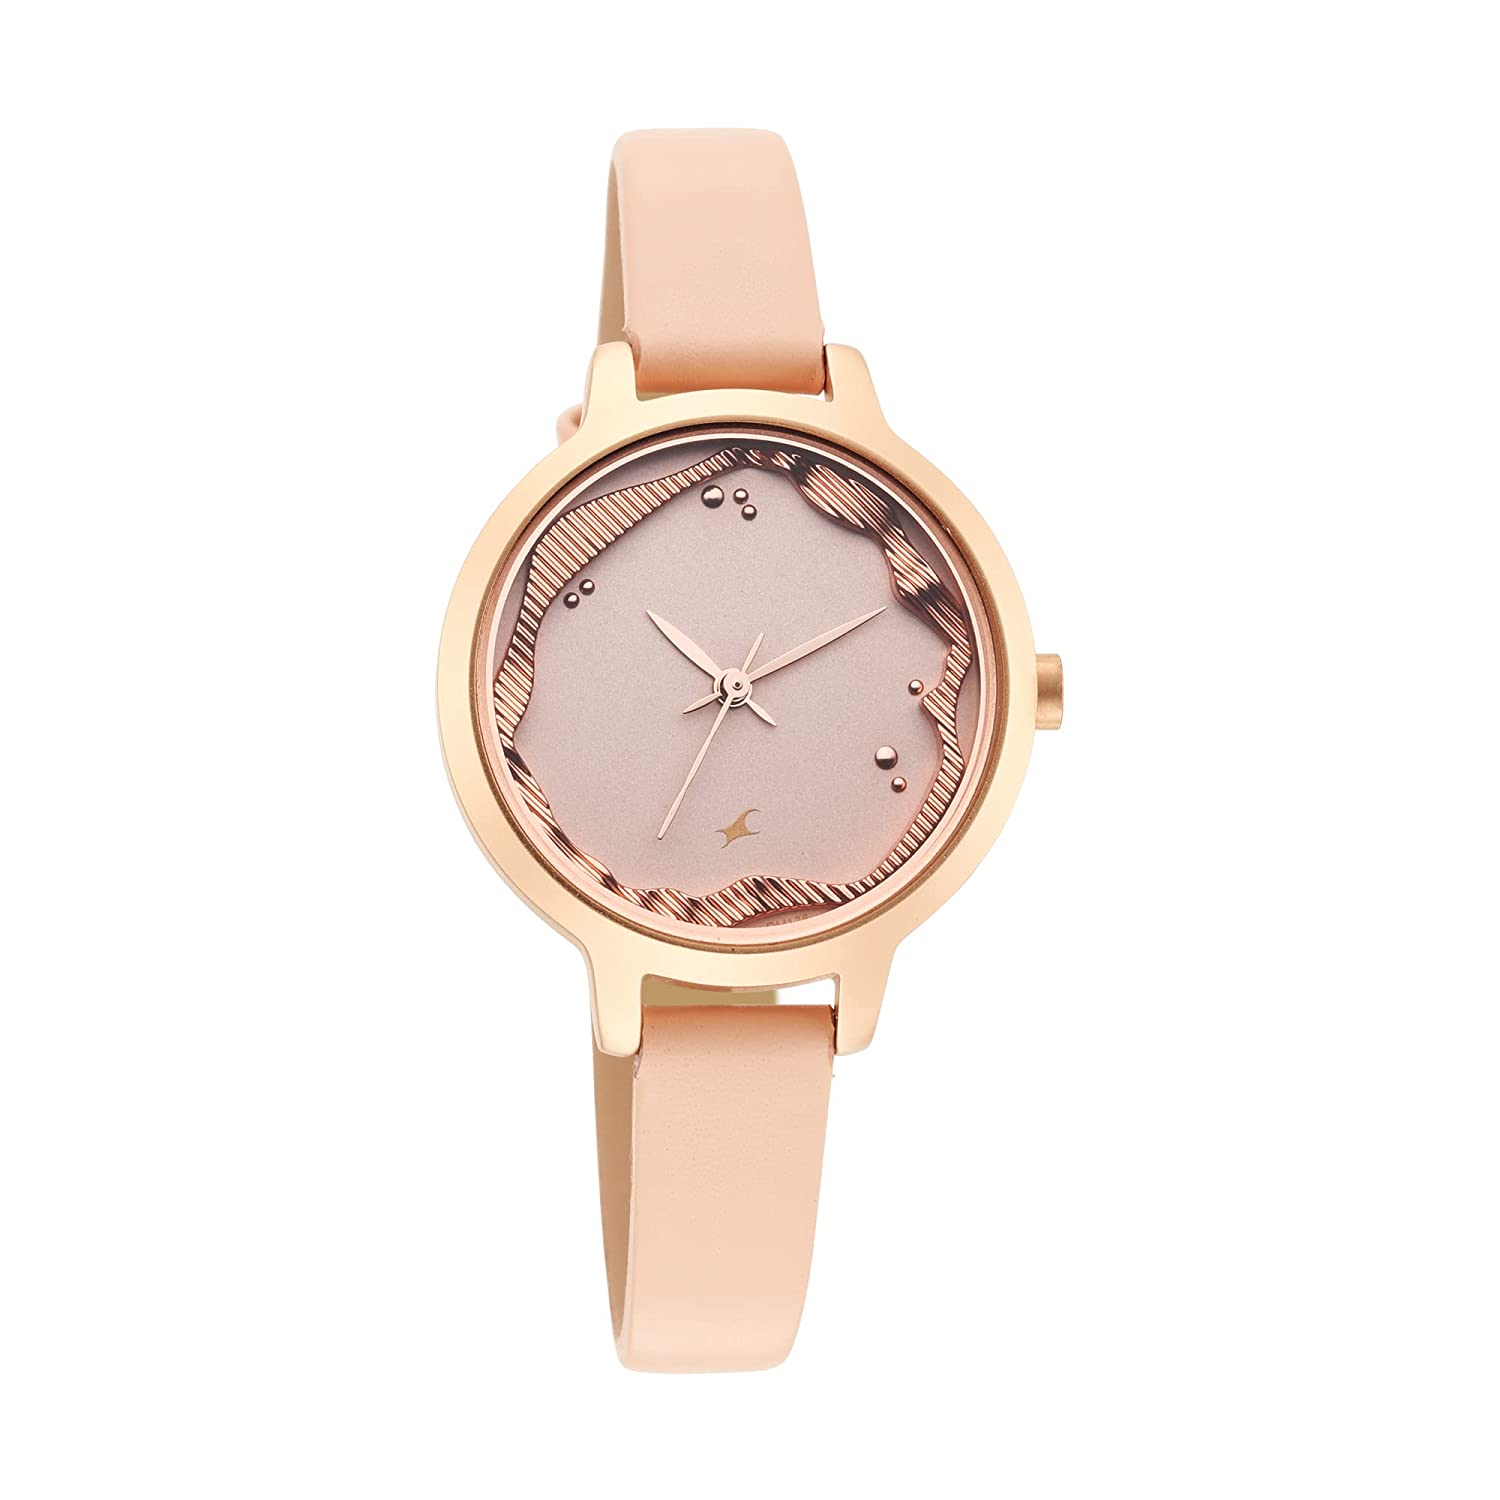 Fastrack Analog Women's Watch 6260WL01 | Leather Band | Water-Resistant | Quartz Movement | Classic Style | Fashionable | Durable | Affordable | Halabh.com